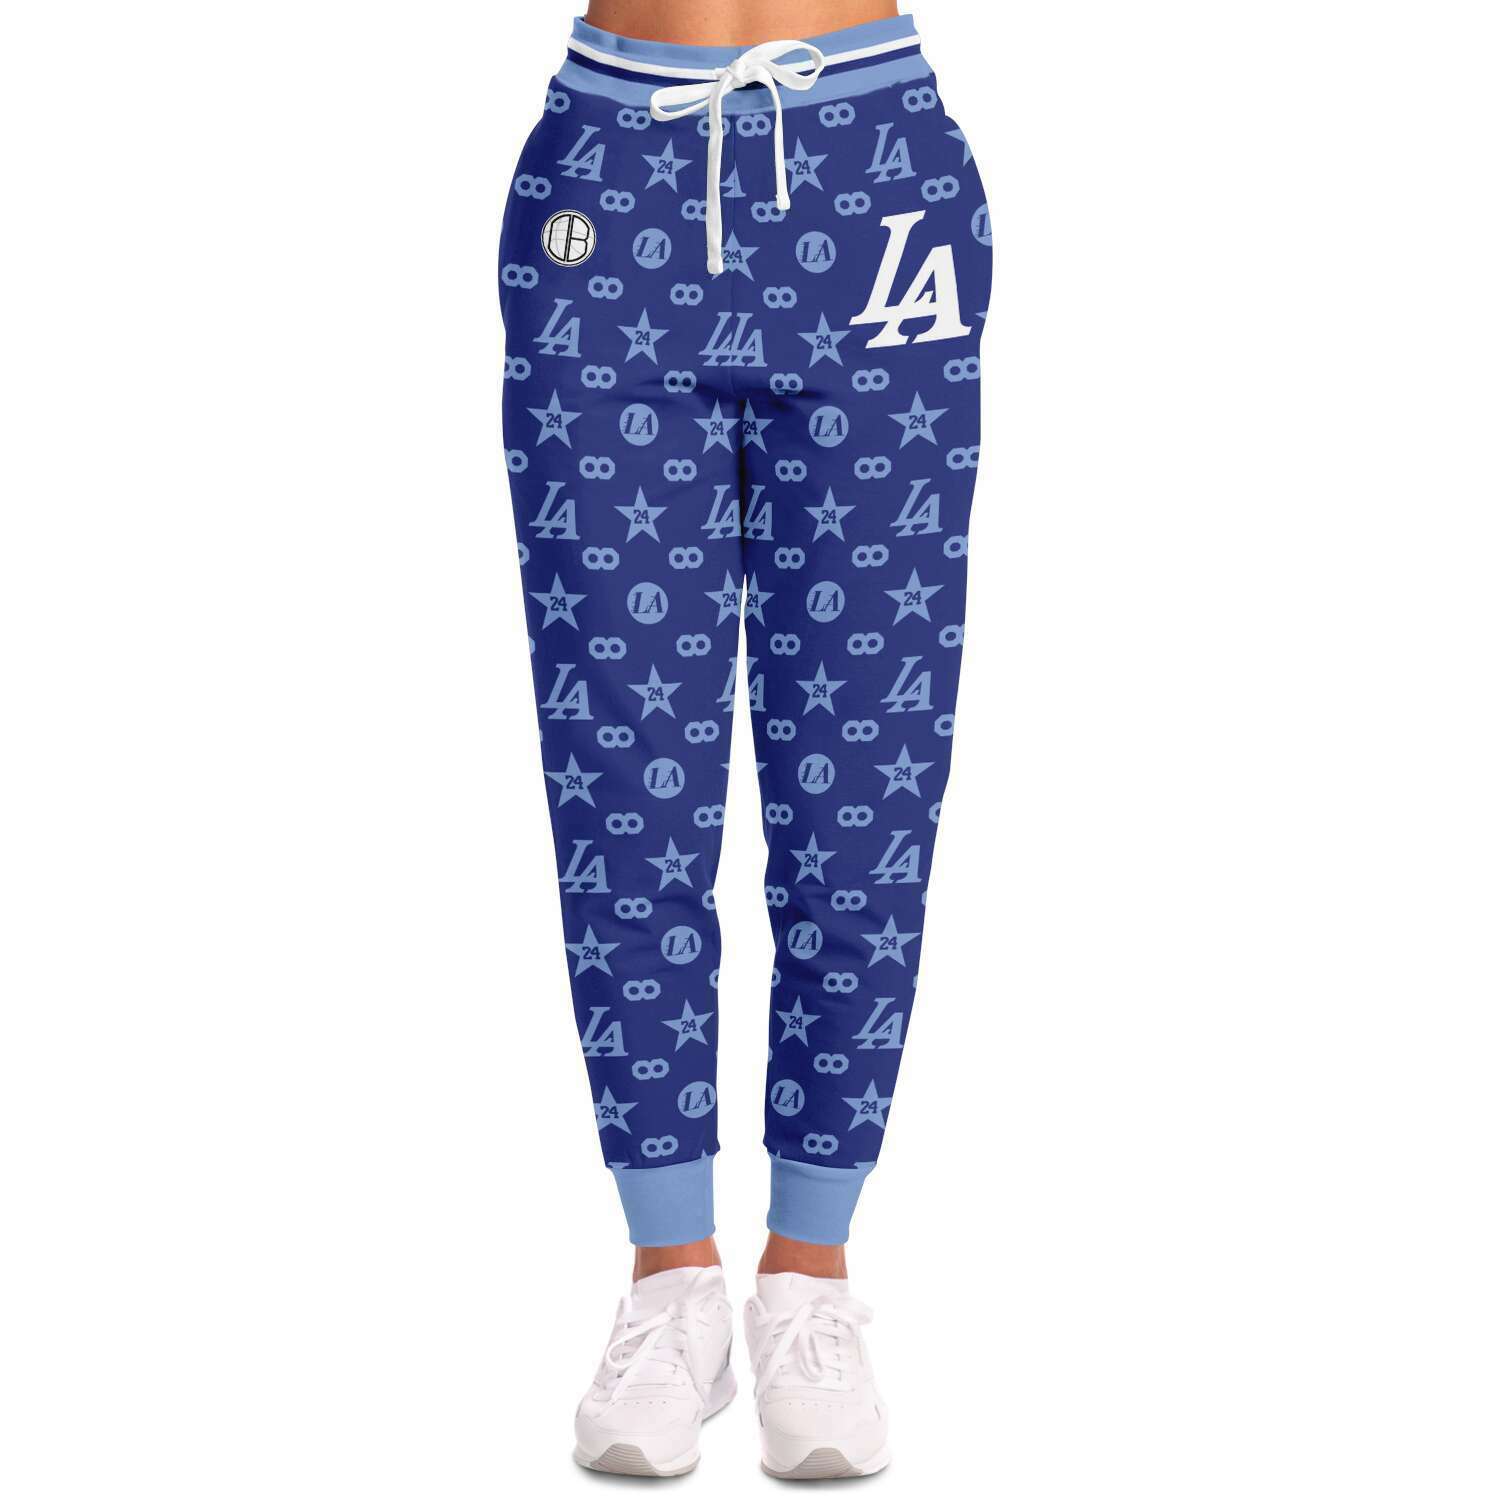 DearBBall Women's Jogging Los Angeles - INFINITY EDITION 